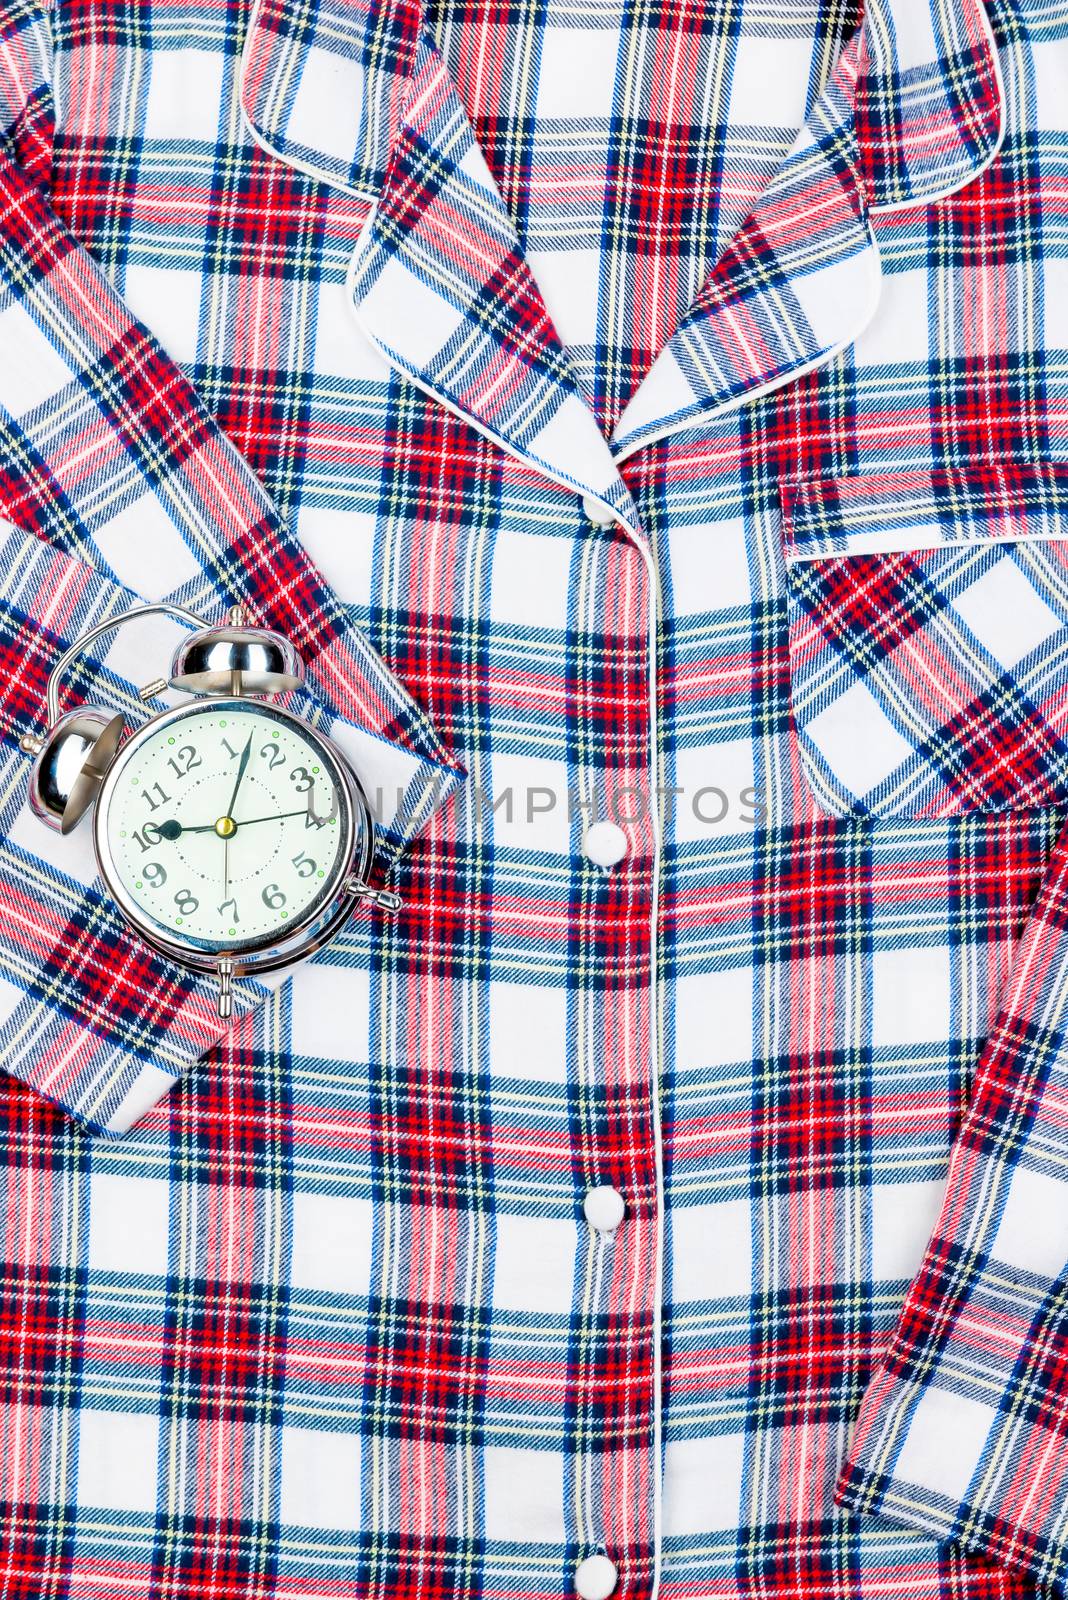 Classic checkered pajamas in full frame and a retro alarm clock